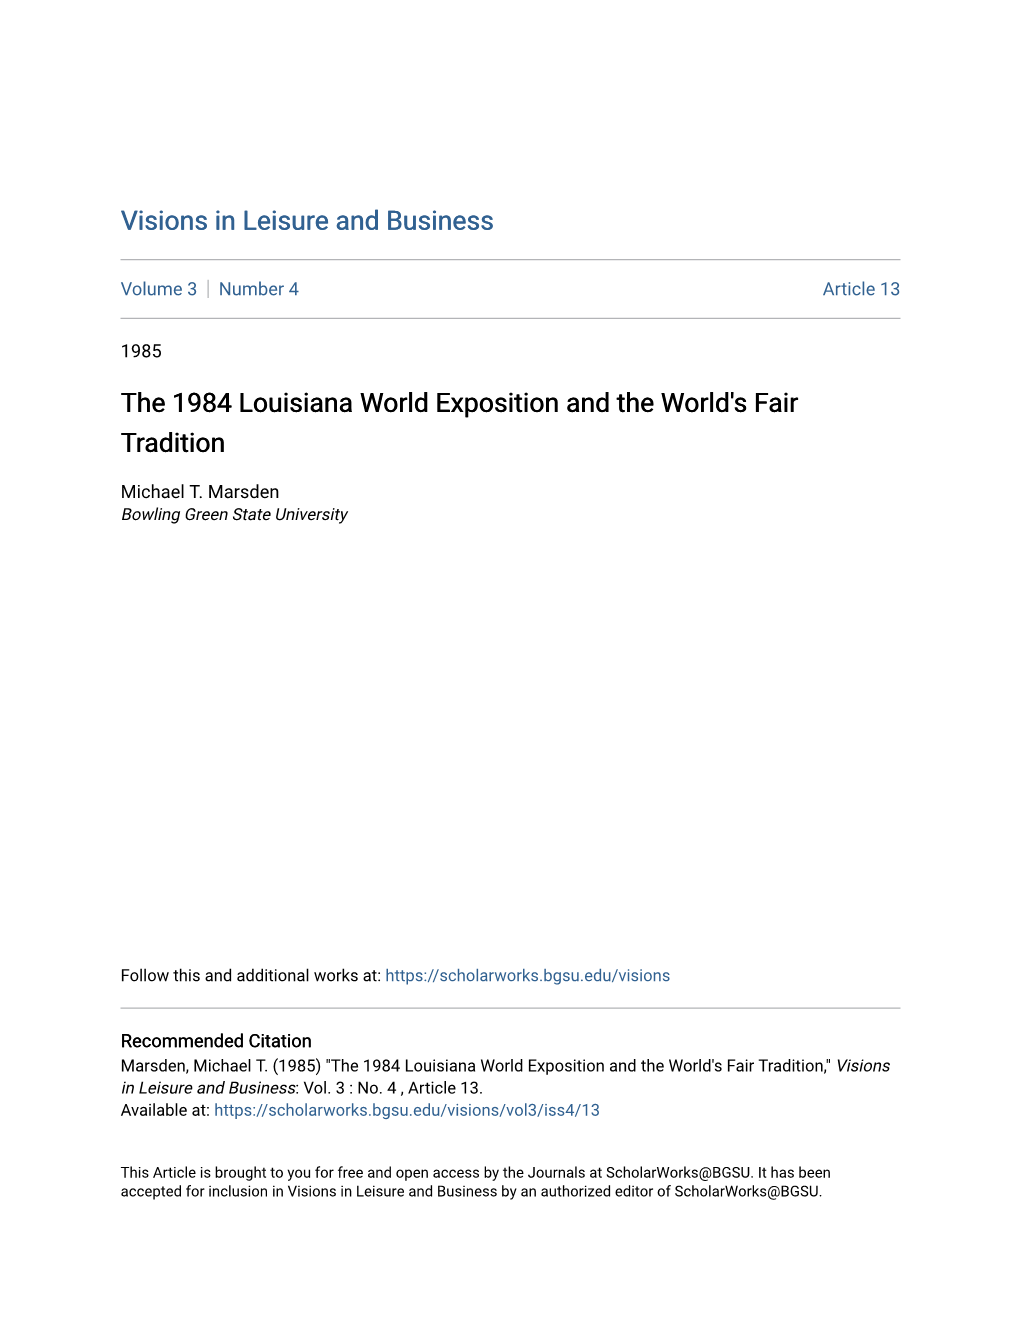 The 1984 Louisiana World Exposition and the World's Fair Tradition